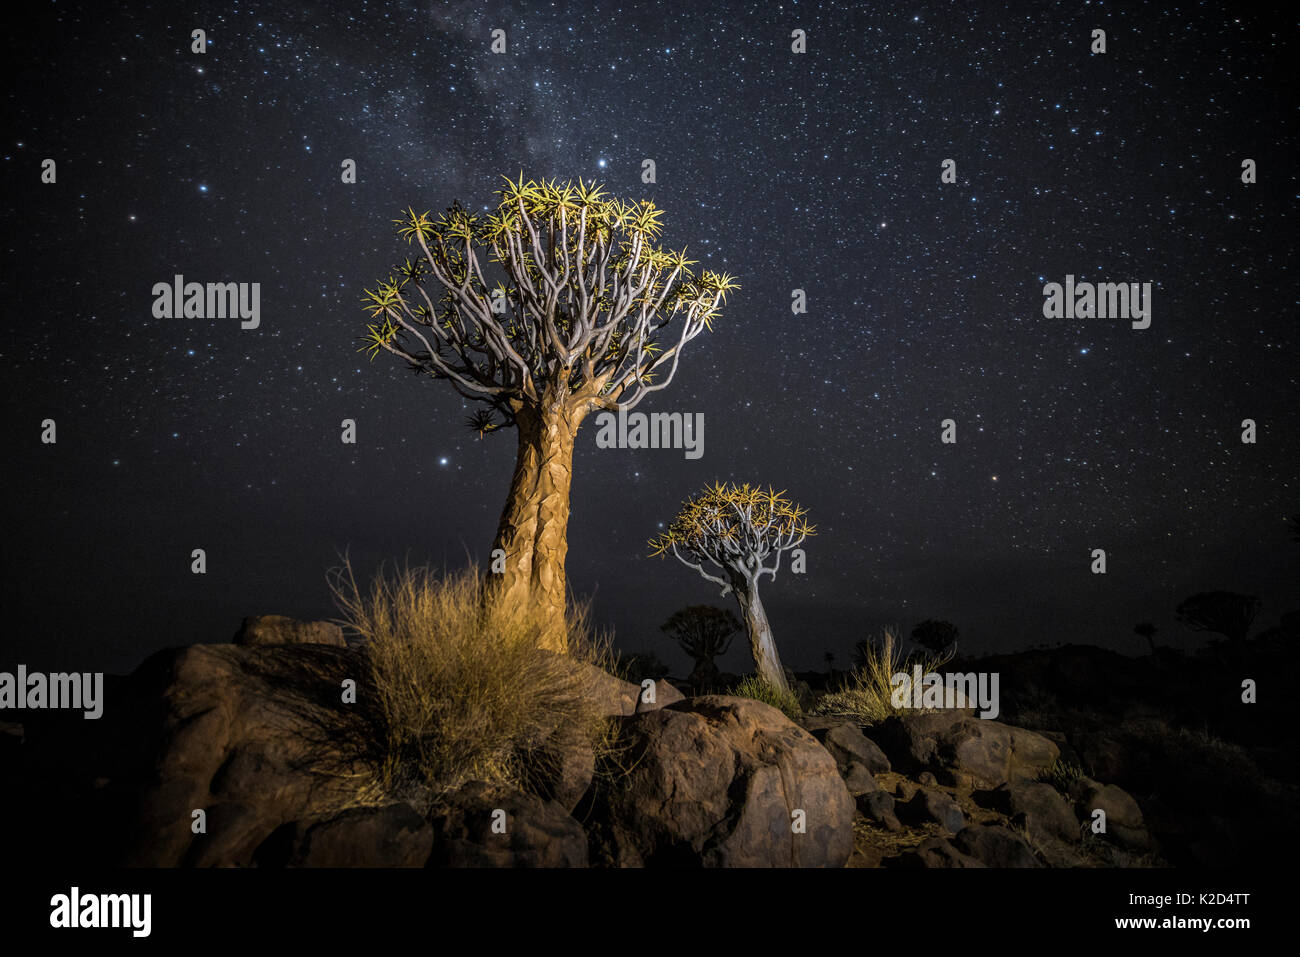 Quiver trees (Aloe dichotoma) with the Milky Way at night, Keetmanshoop, Namibia. Colours accentuated digitally. Stock Photo